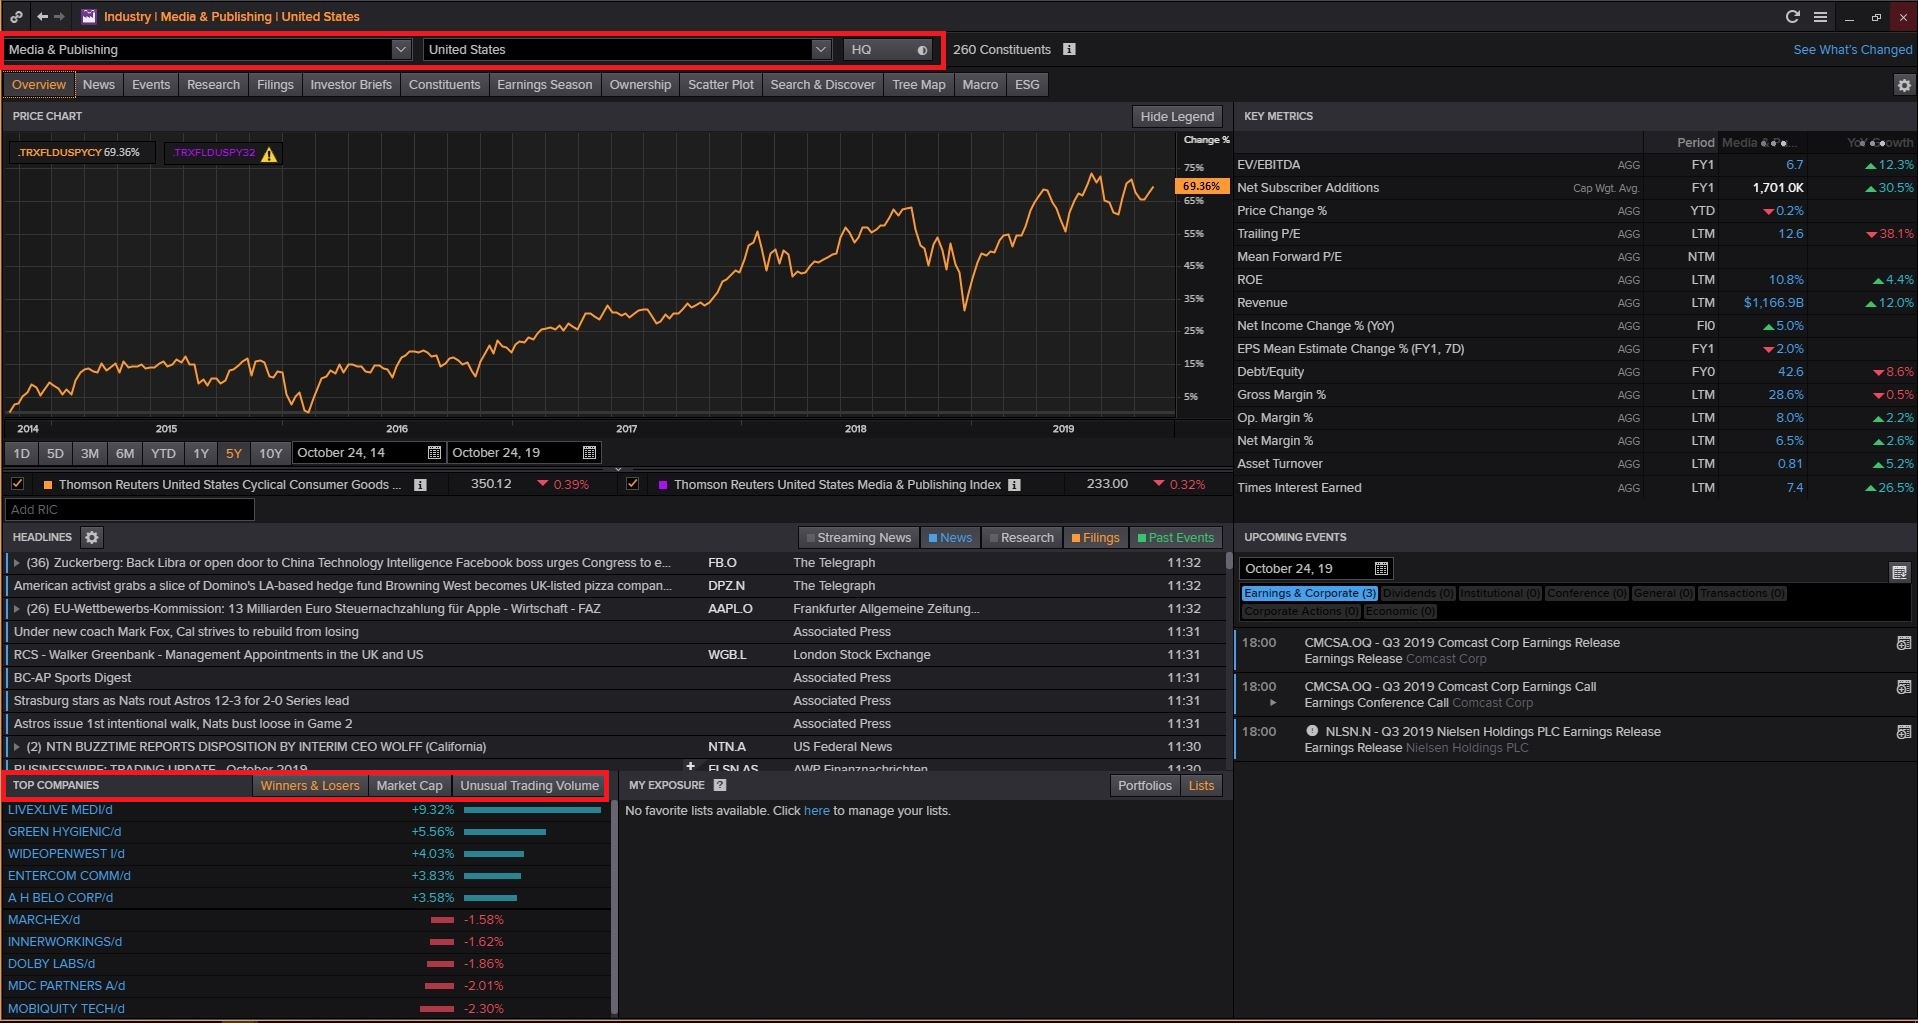 Login to Thomson Reuters Eikon (Available Only in Library) then Type INDUS and Search and Search for Media and Click on Required Industry and Select Country 